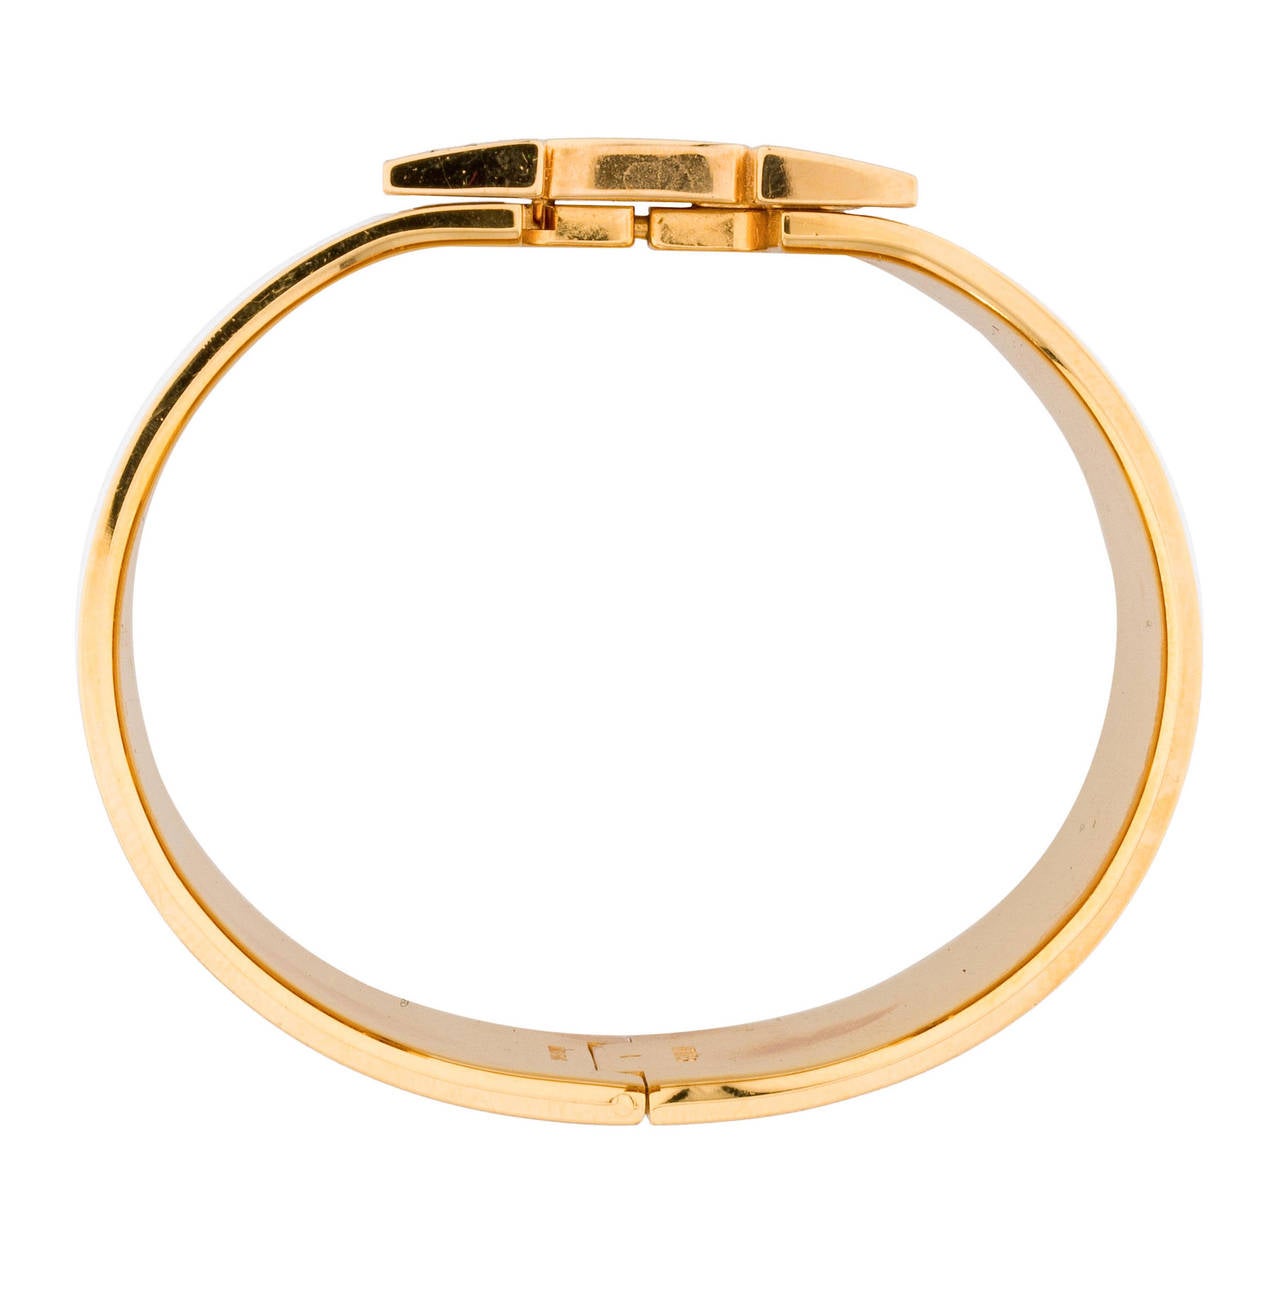 Gold-plated and white enamel Hermès Extra Wide Clic Clac Bracelet with H clasp closure. Stamped Square O 2011. Size PM.
Measurements:  diameter  2.25